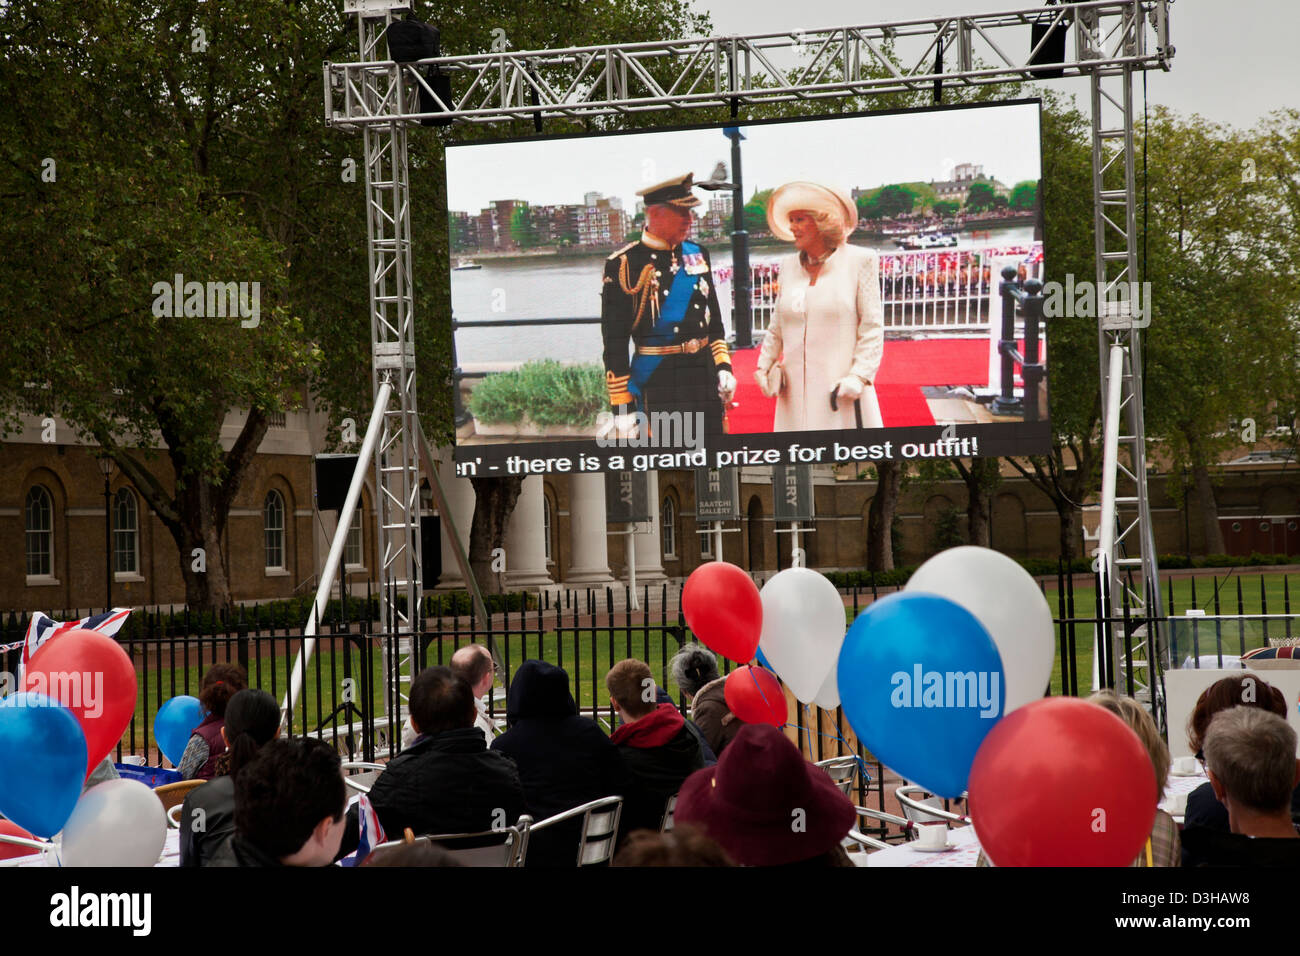 People watch Prince Charles and Camilla on large screen during the Diamond Jubilee celebrations in London, UK Stock Photo